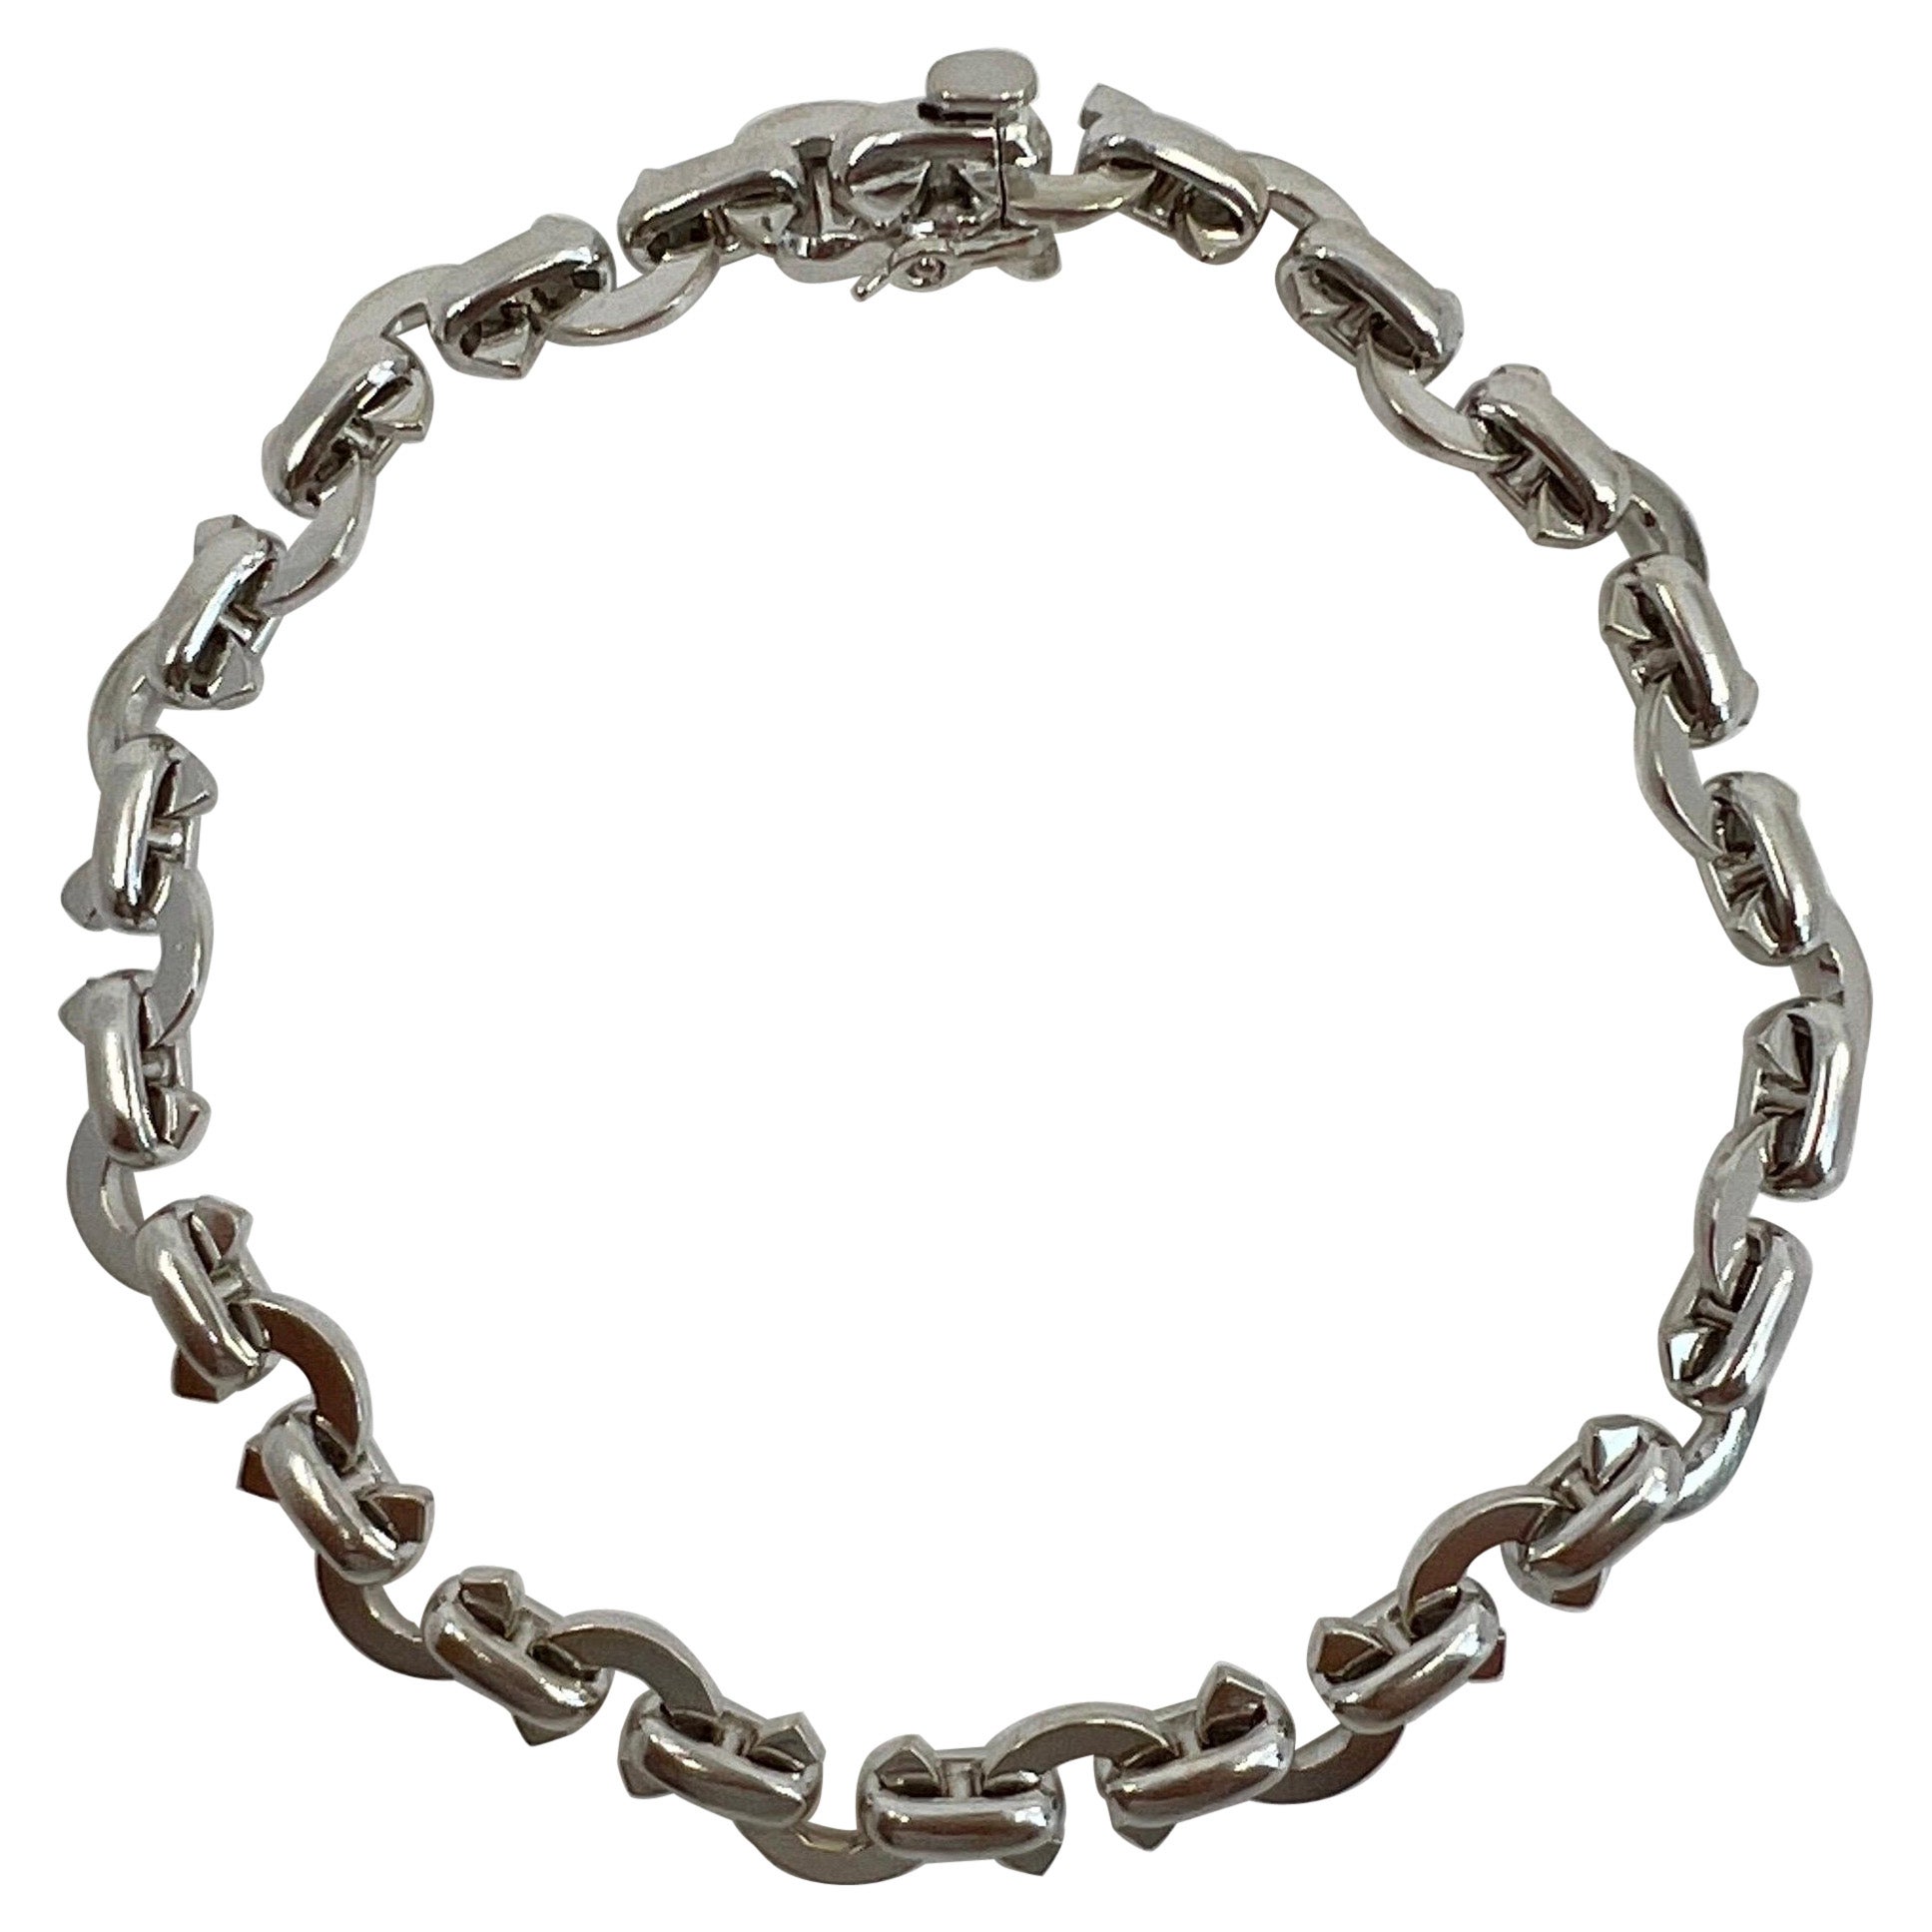 Rare Limited Edition Chanel C Link Charm 18k White Gold Bracelet 20cm With Box